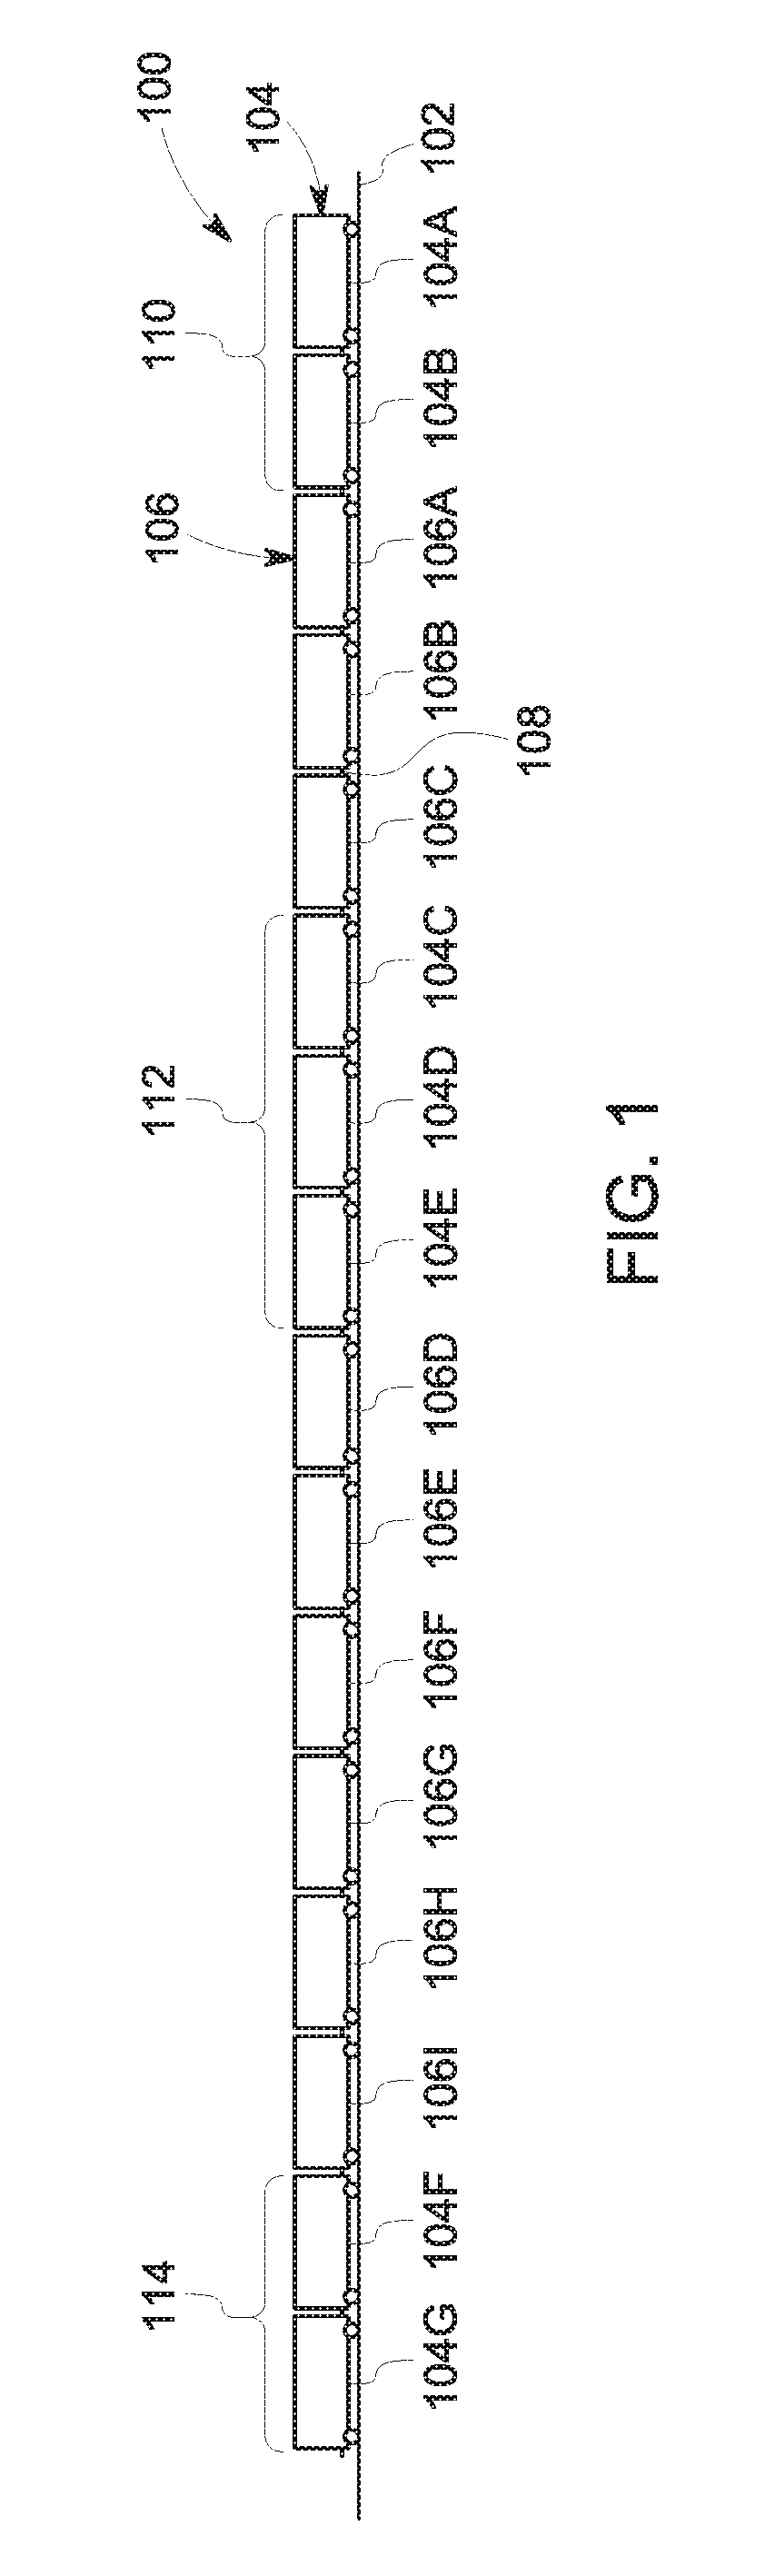 Vehicle convoy control system and method